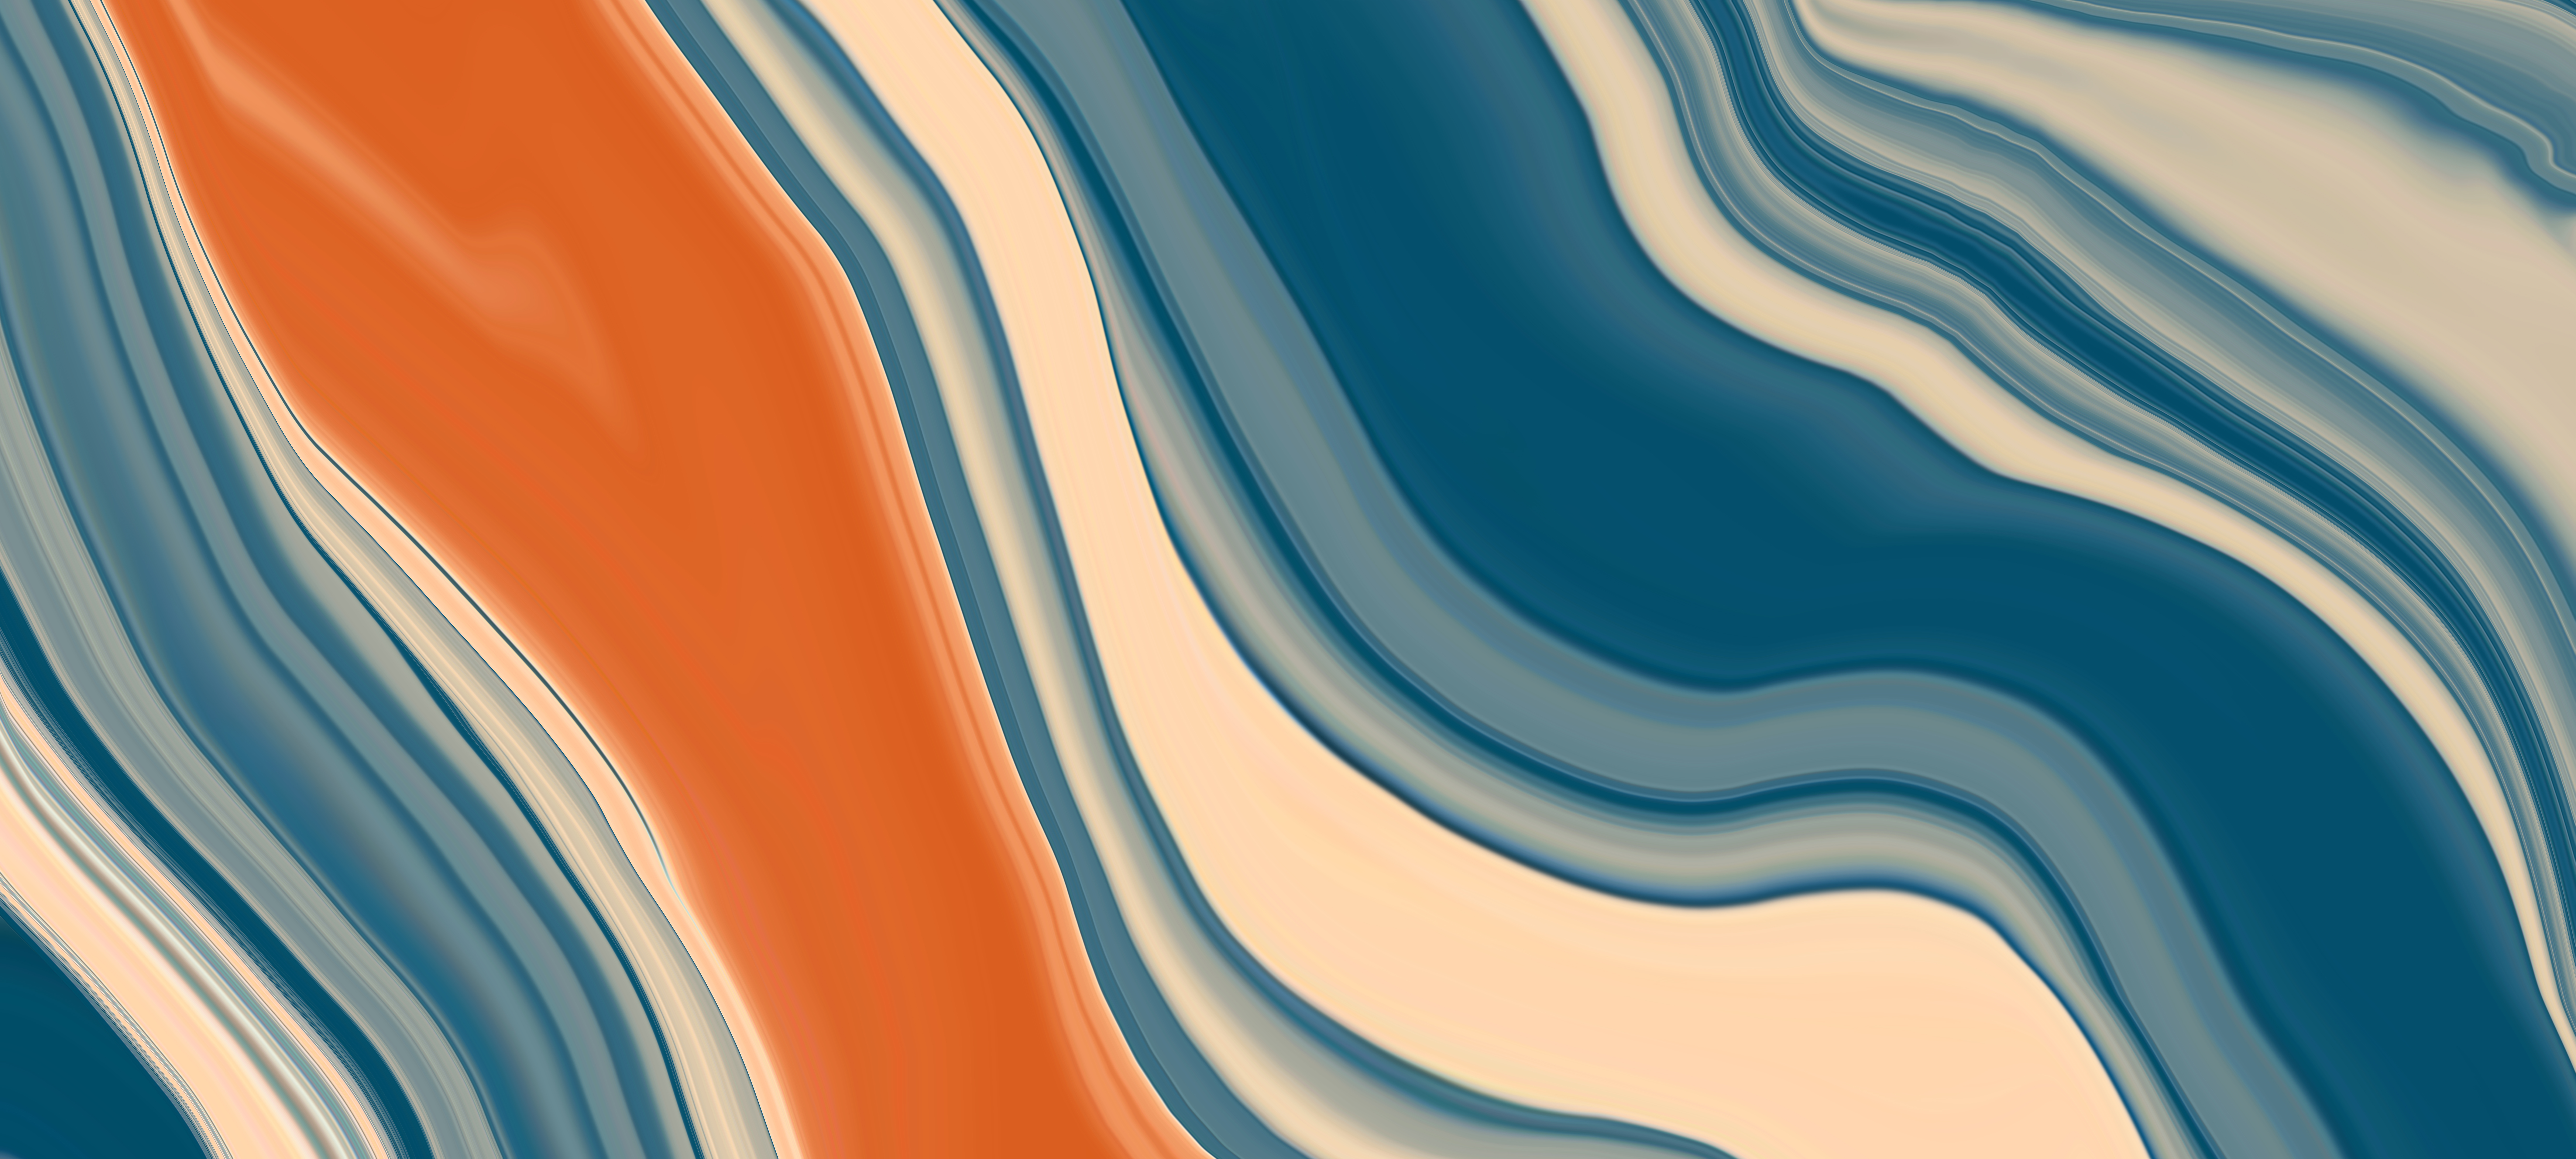 Abstract Fluid Digital Art Colorful Line Art Simple Background 10750x4838